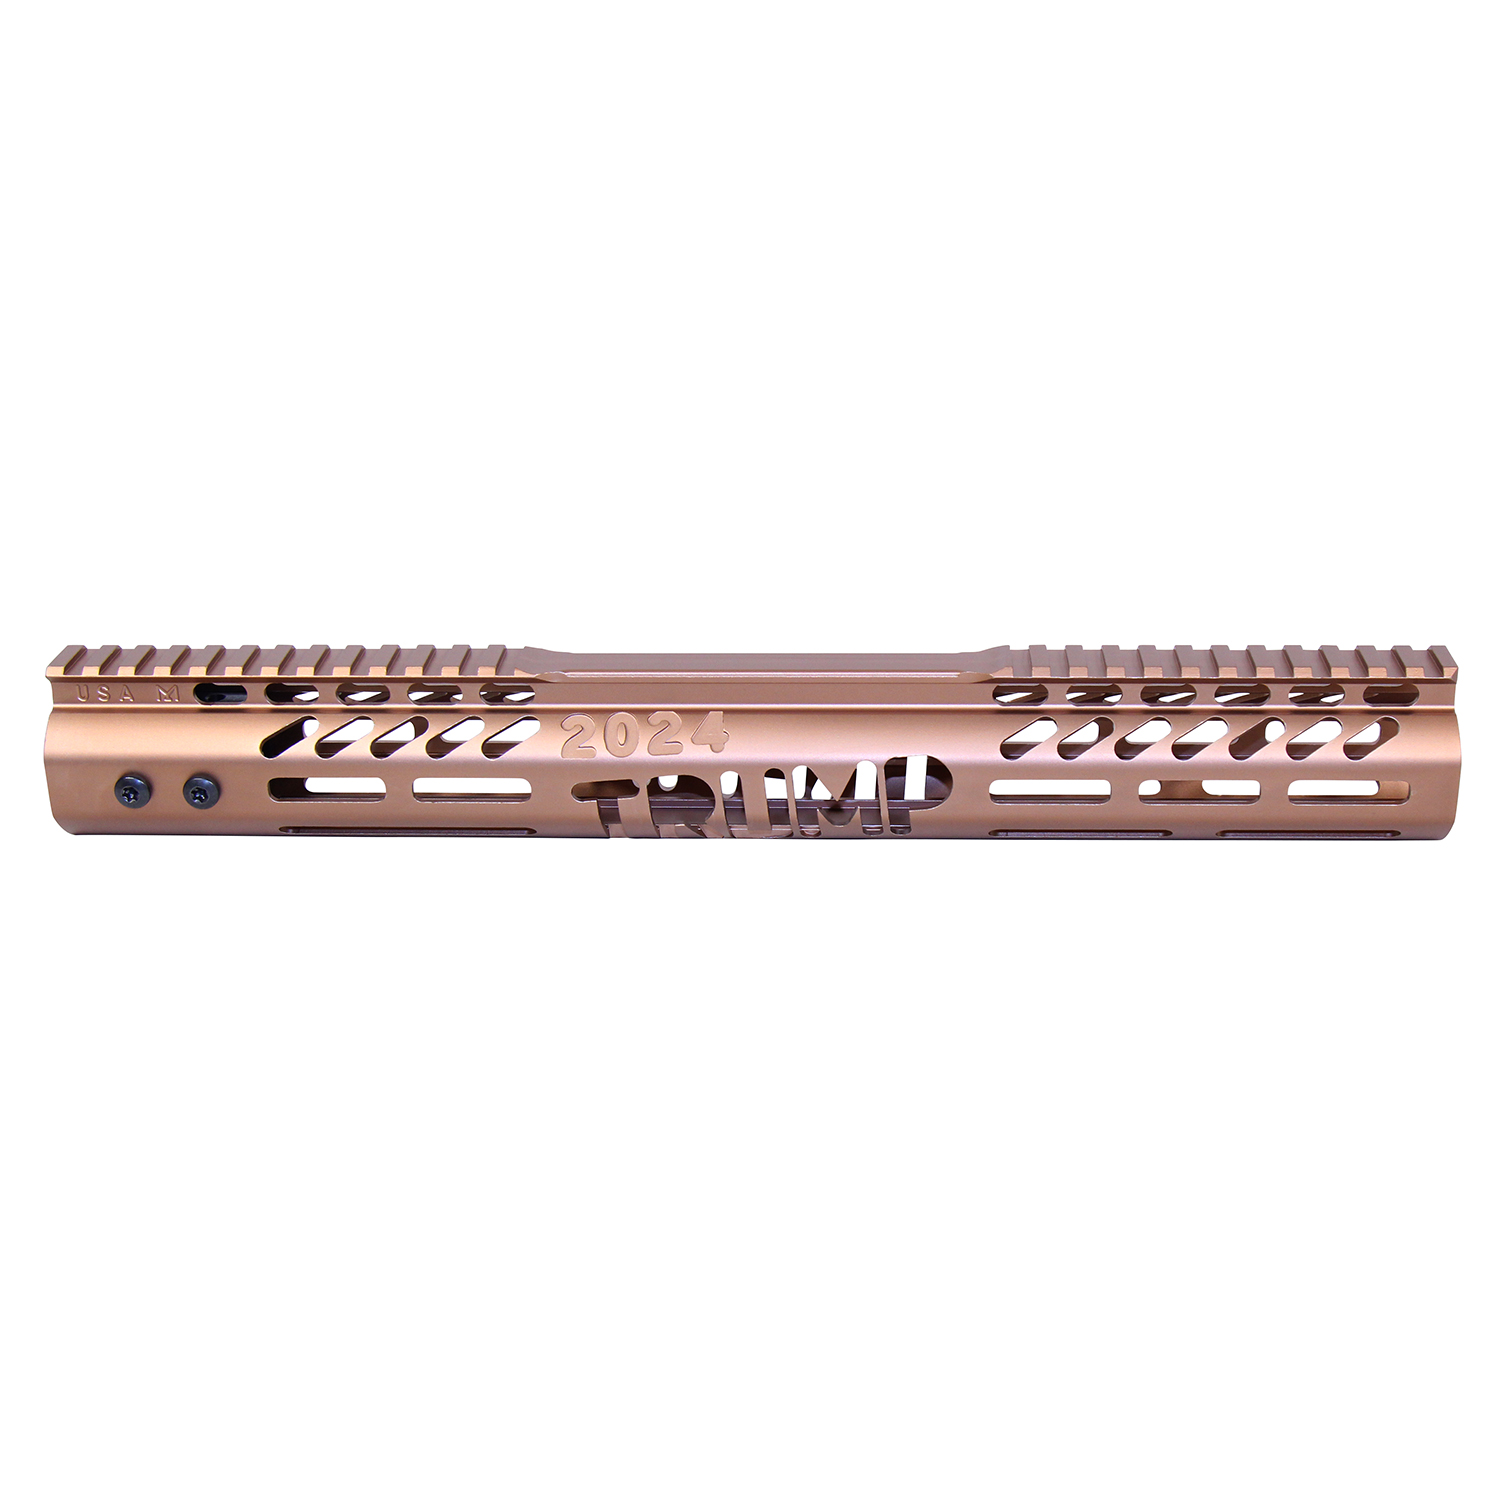 AR .308 Cal 15" "Trump Series" Limited Edition M-LOK System Free Floating Handguard With Monolithic Top Rail (Anodized Bronze)